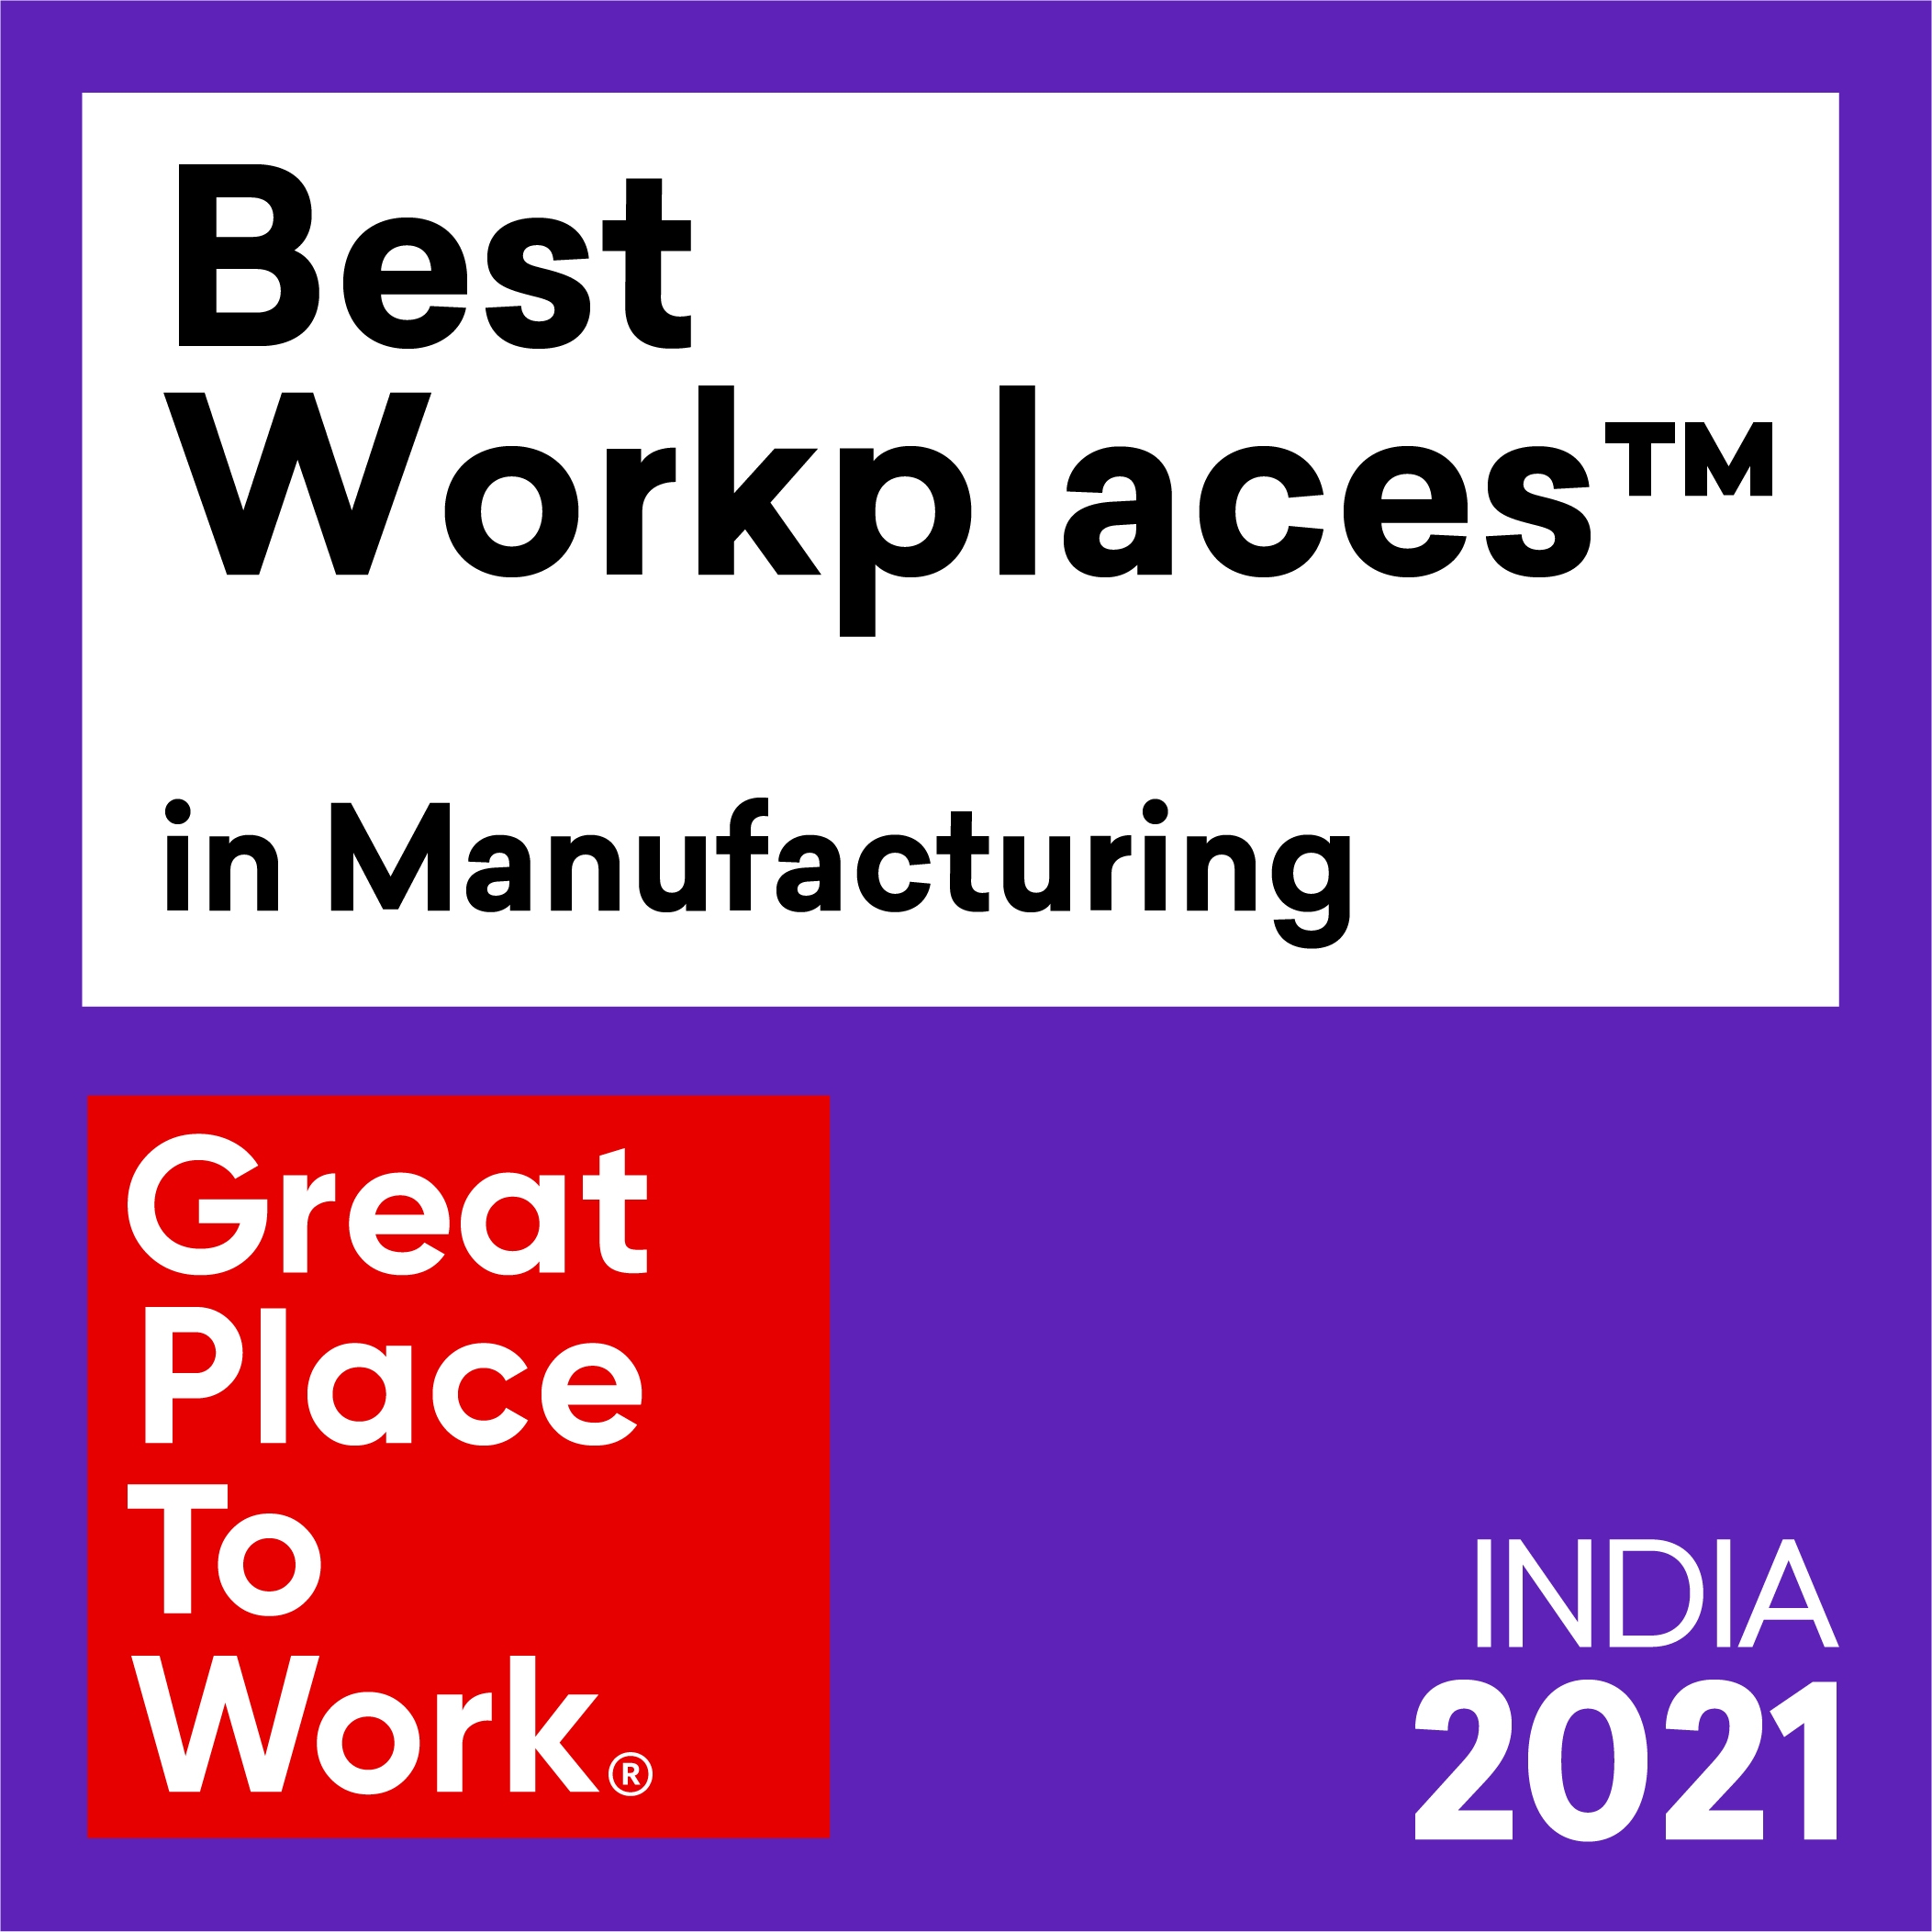 India's Best Workplaces in Manufacturing 2021 Award